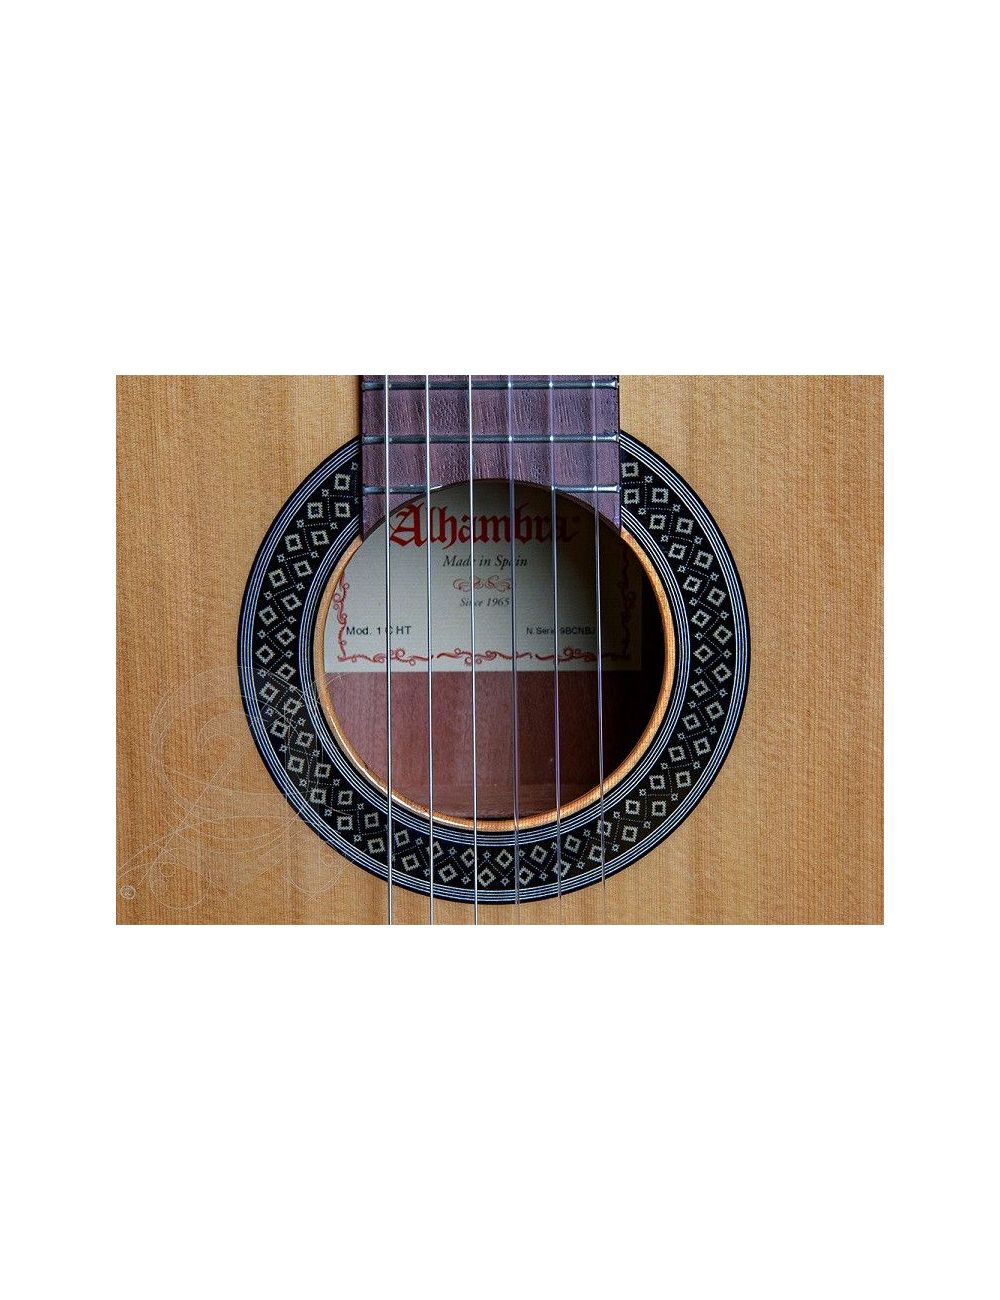 Alhambra 1C HT 7/8 Classical Guitar 1C HT 7/8 Special sizes